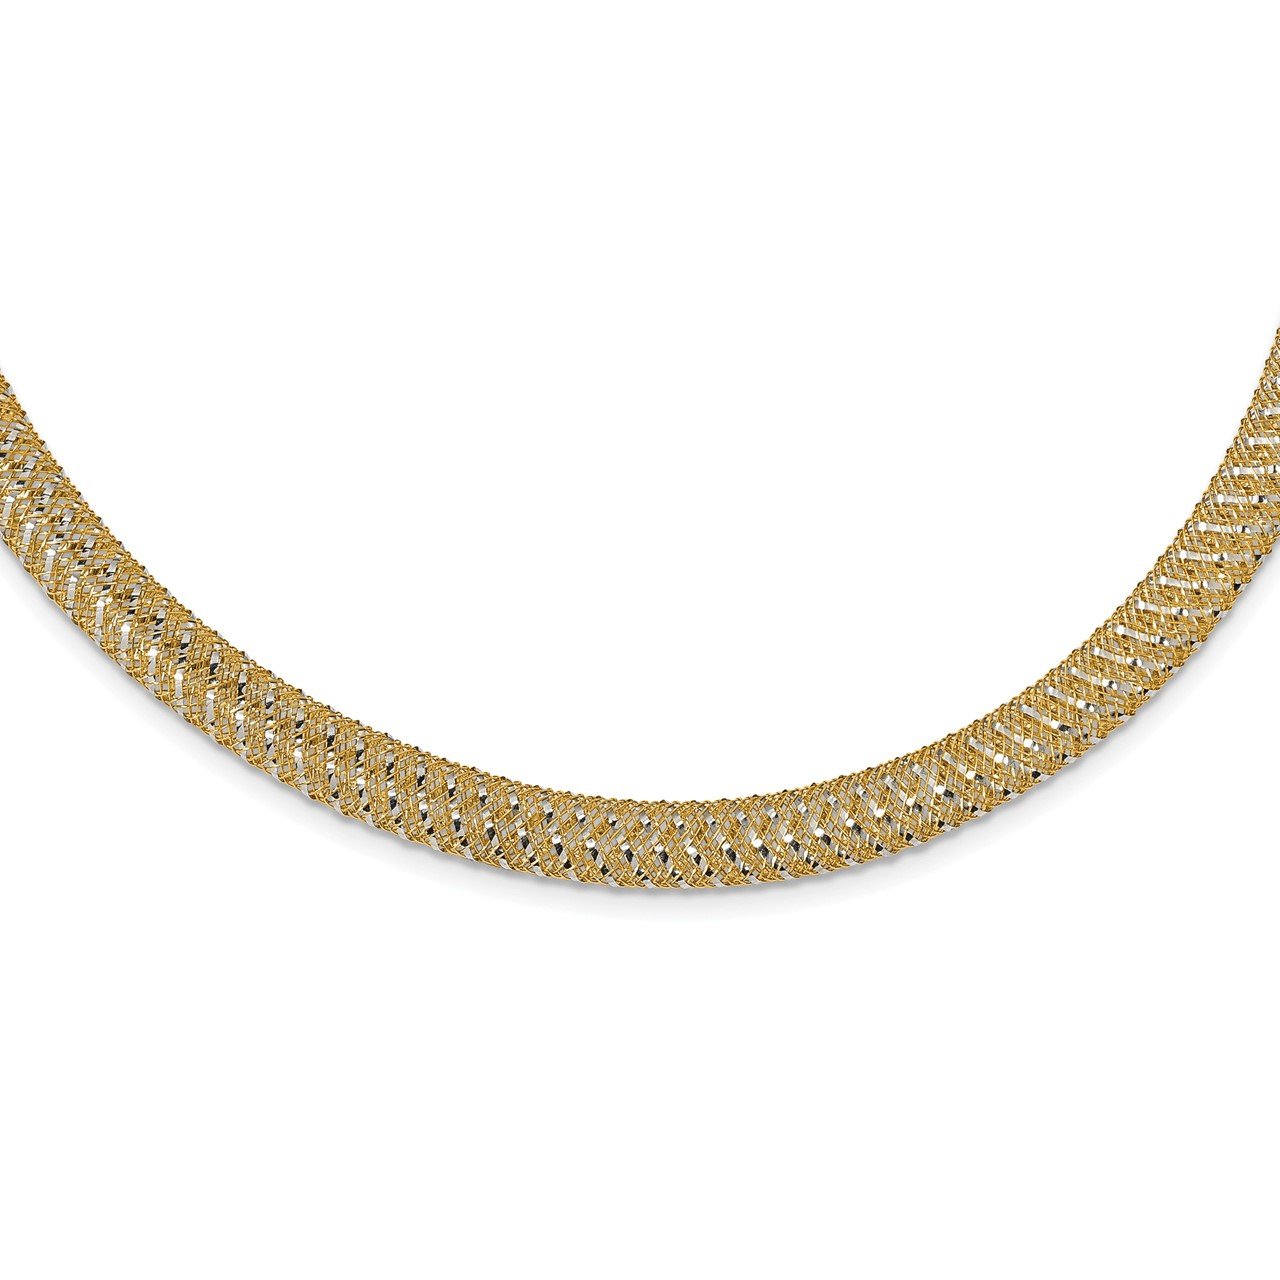 Leslie's 14K Two-tone Polished Mesh Stretch Necklace